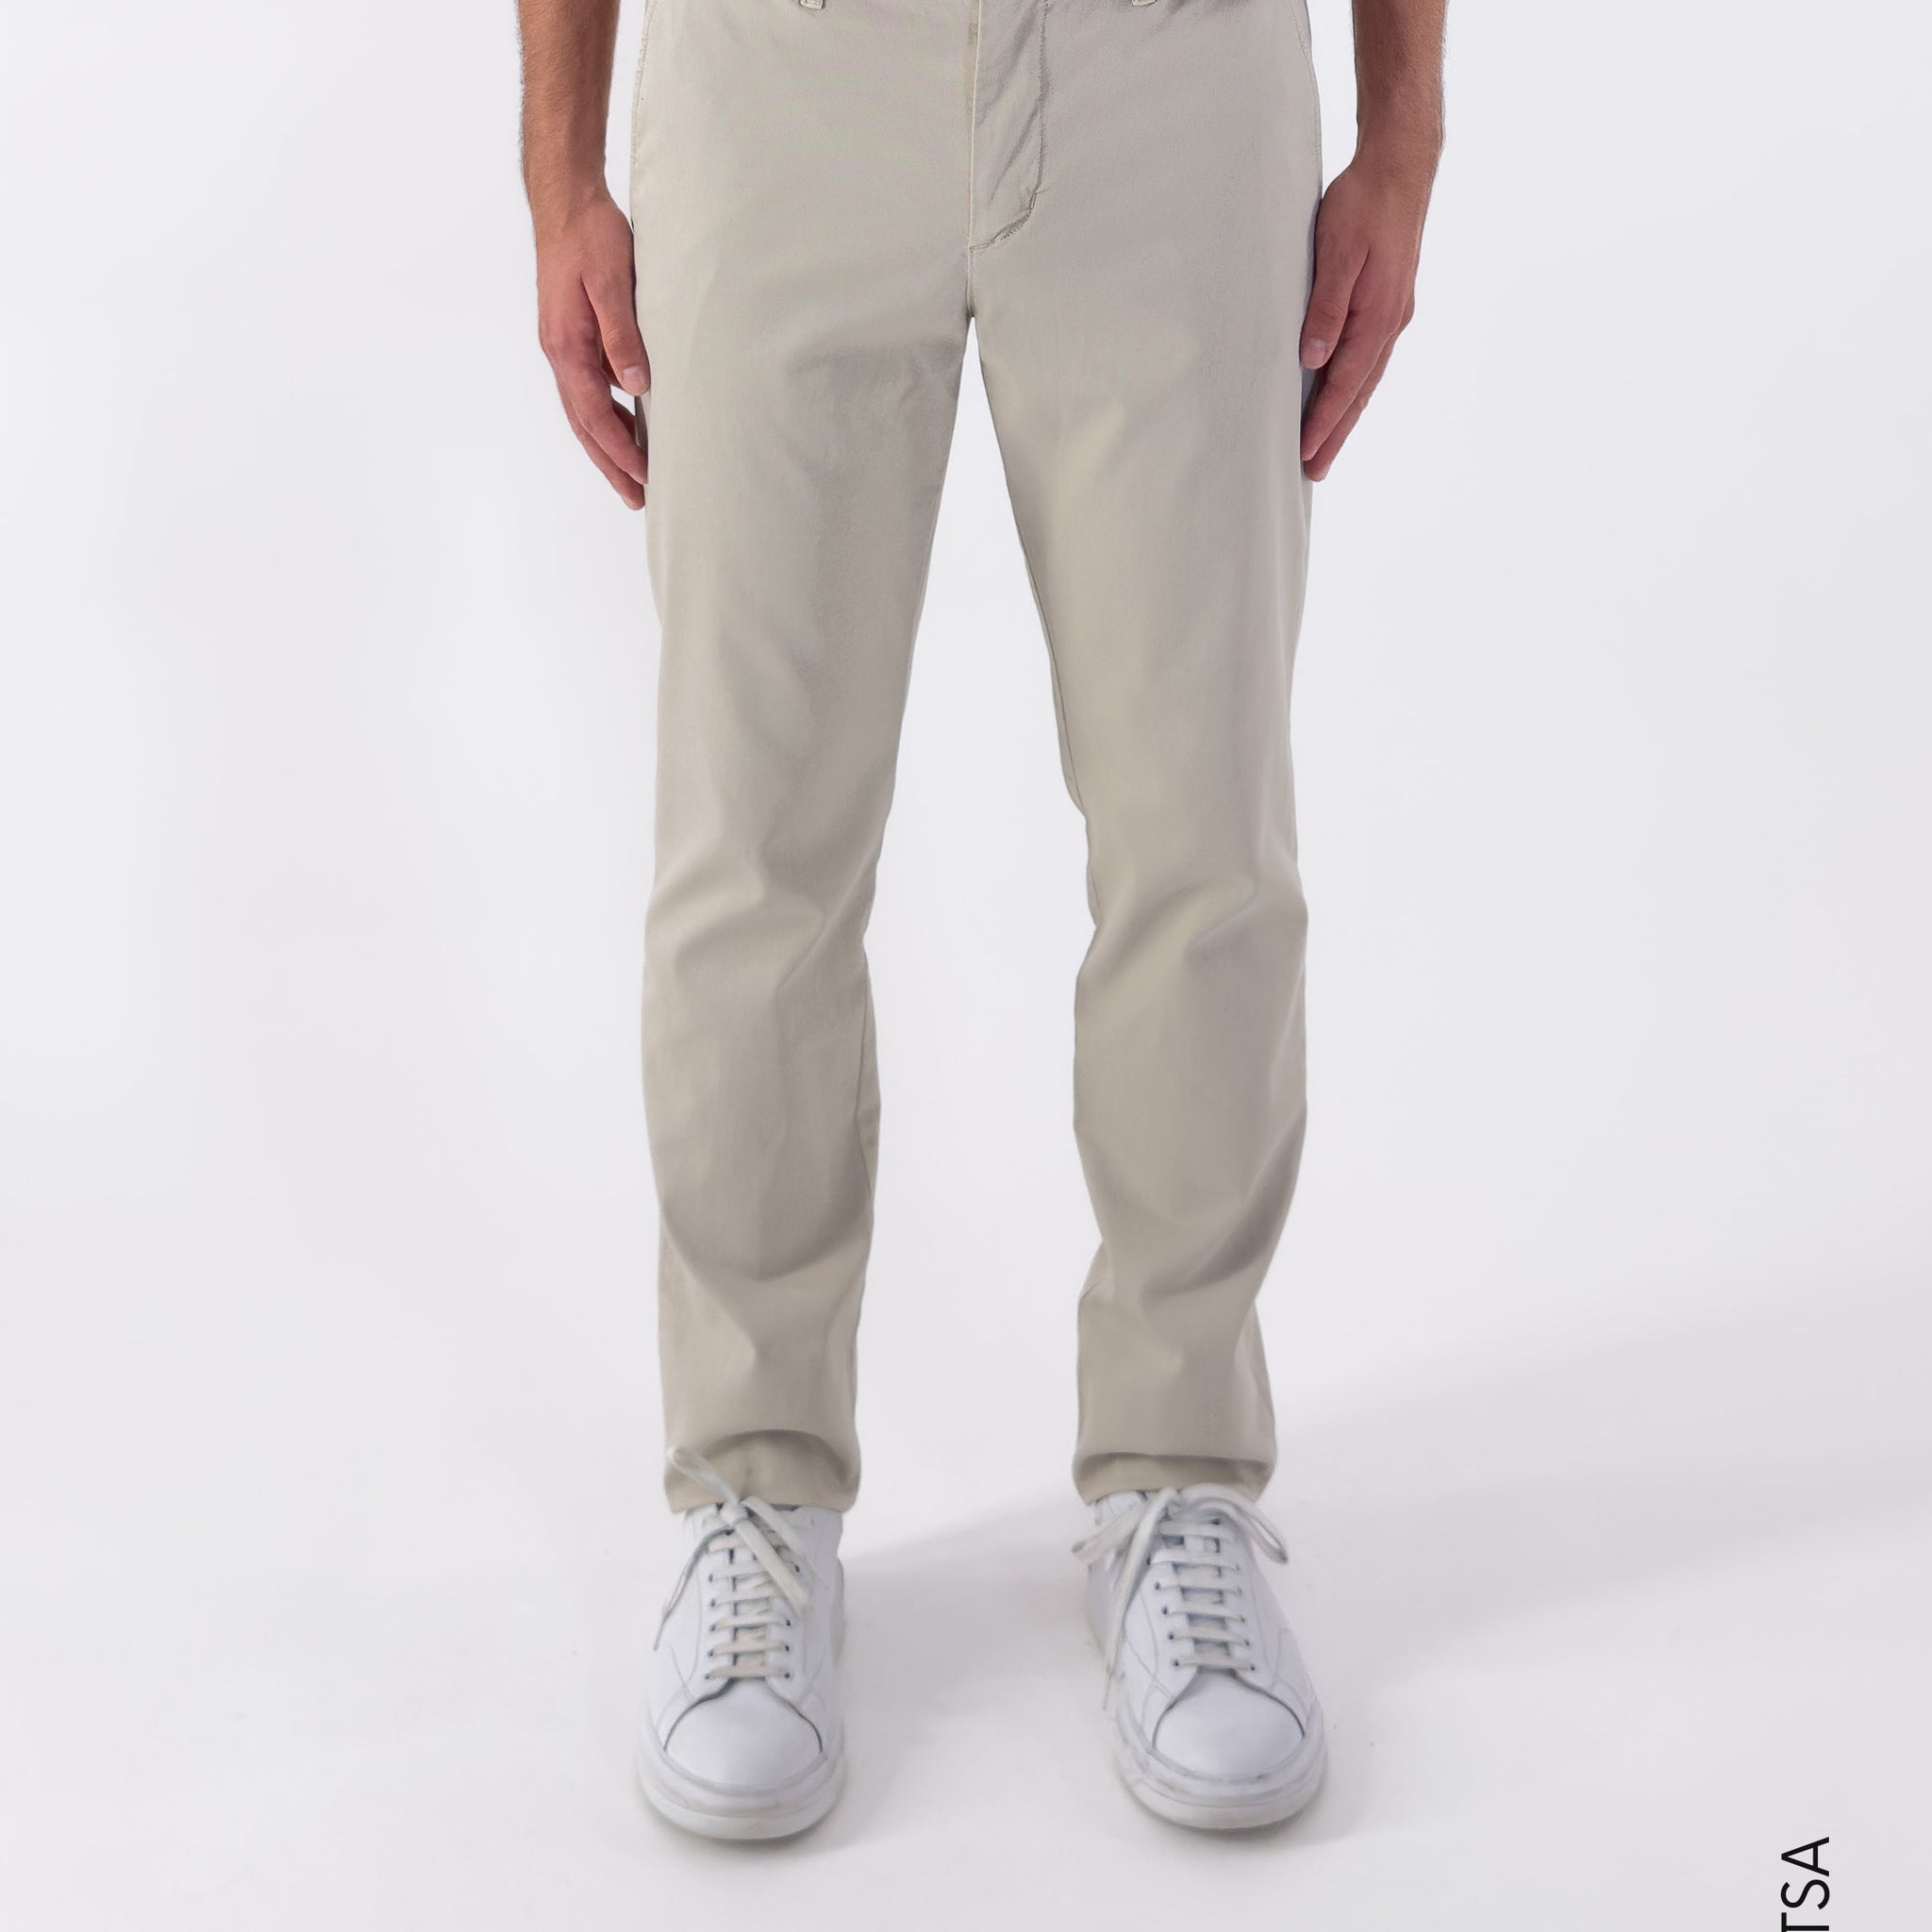 Stretch chino trousers - Tommy Hilfiger